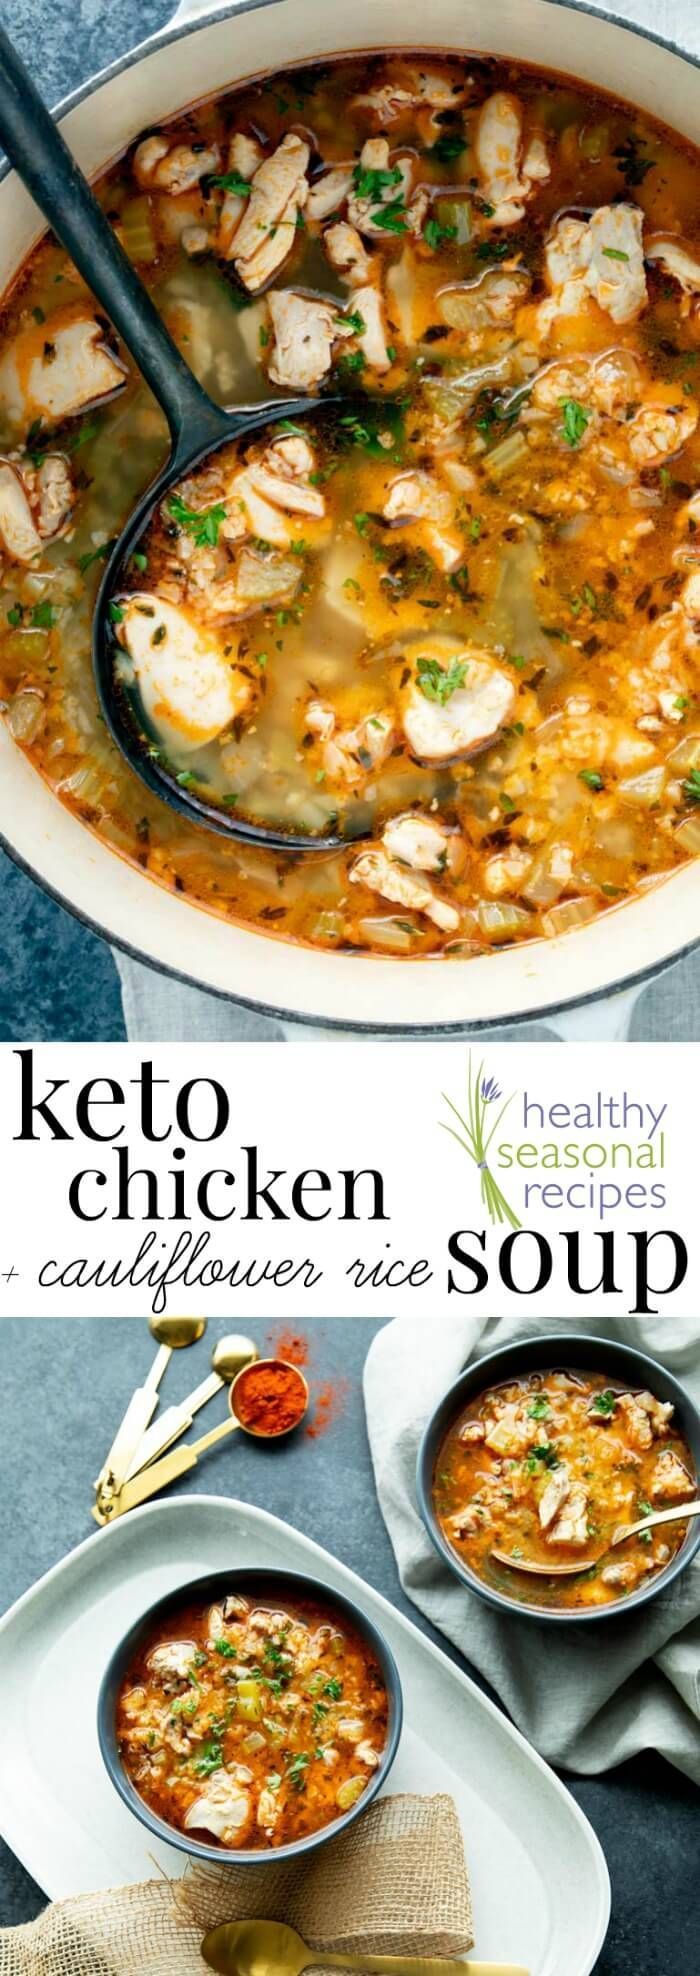 Keto chicken soup -   12 healthy recipes Soup fitness ideas